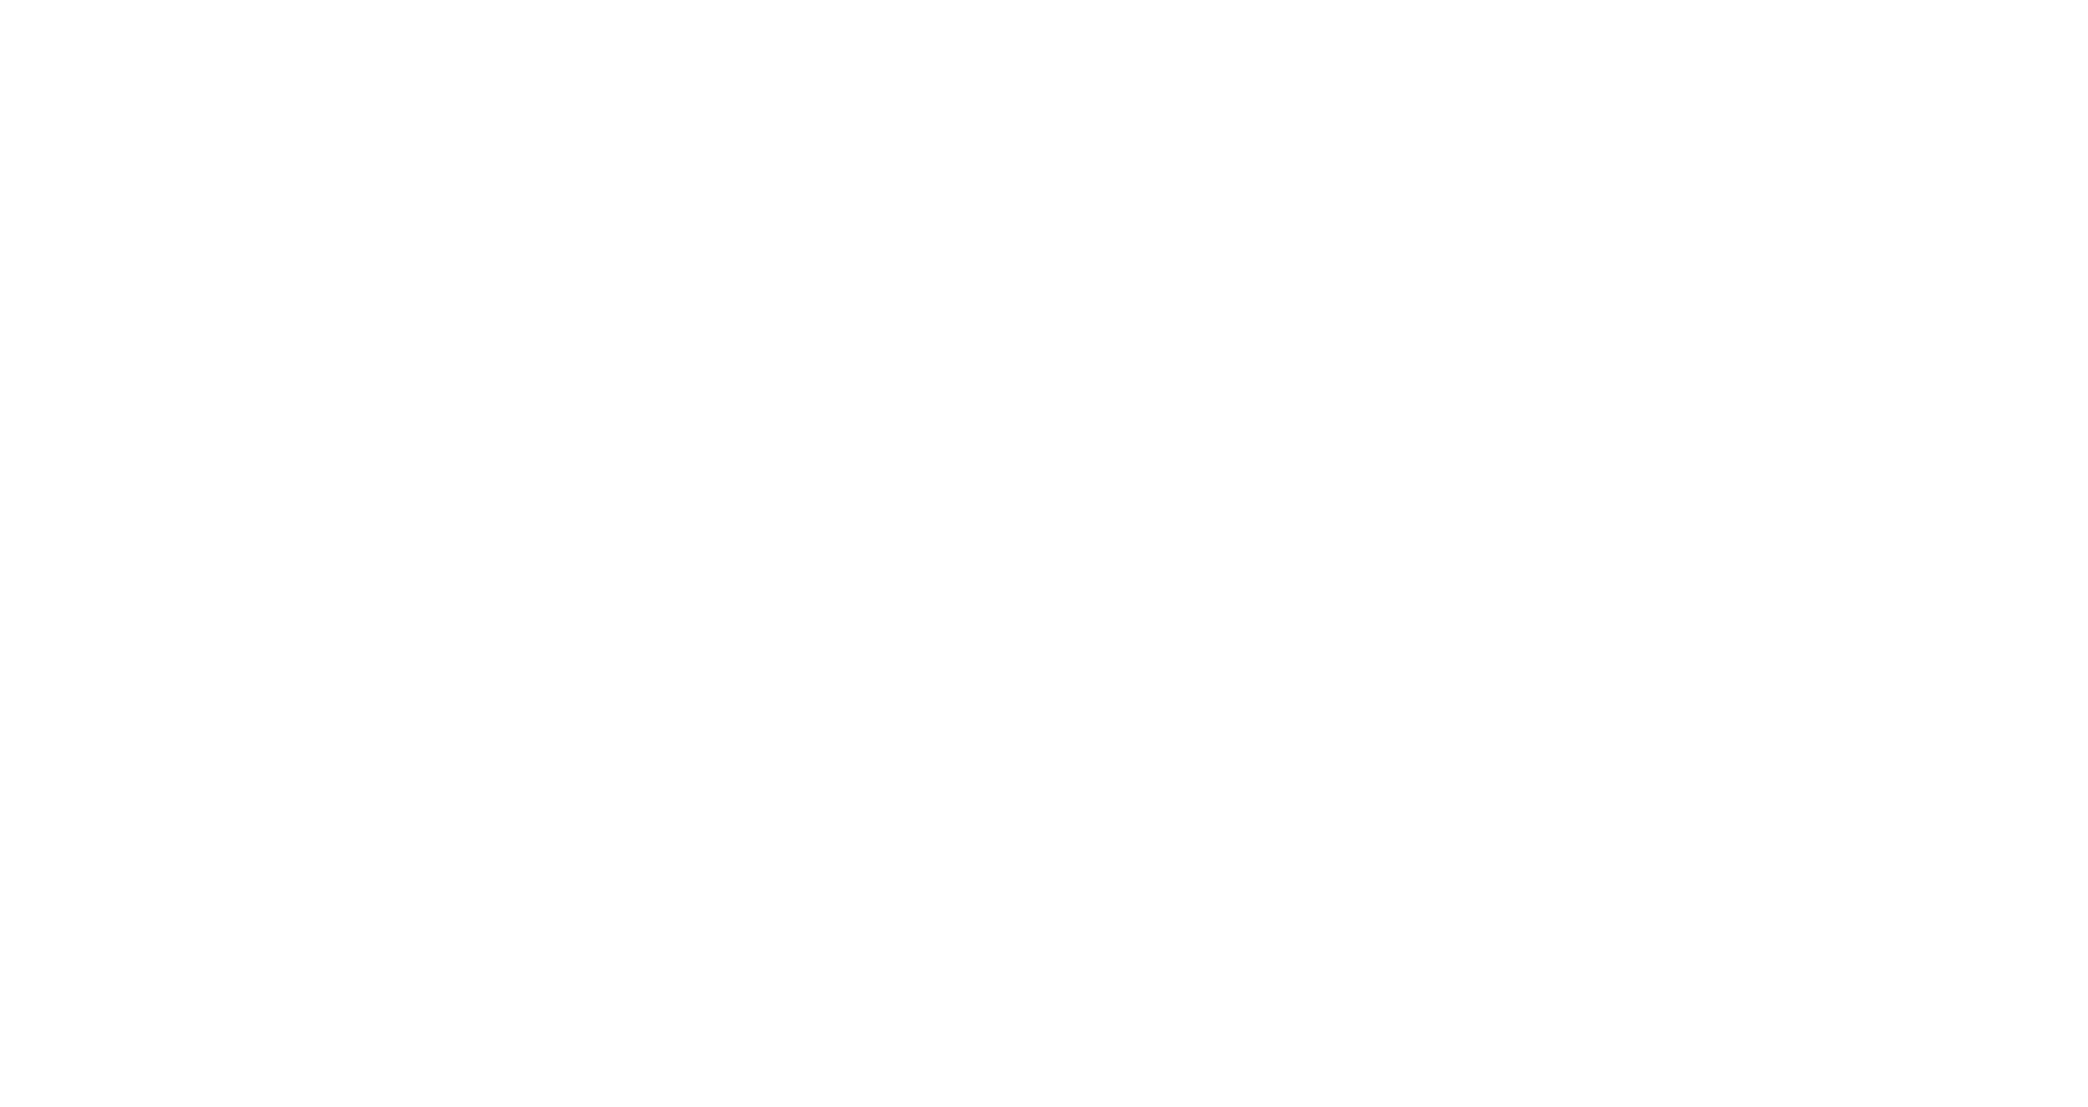 IndieFEST BOS LOGO WHITE